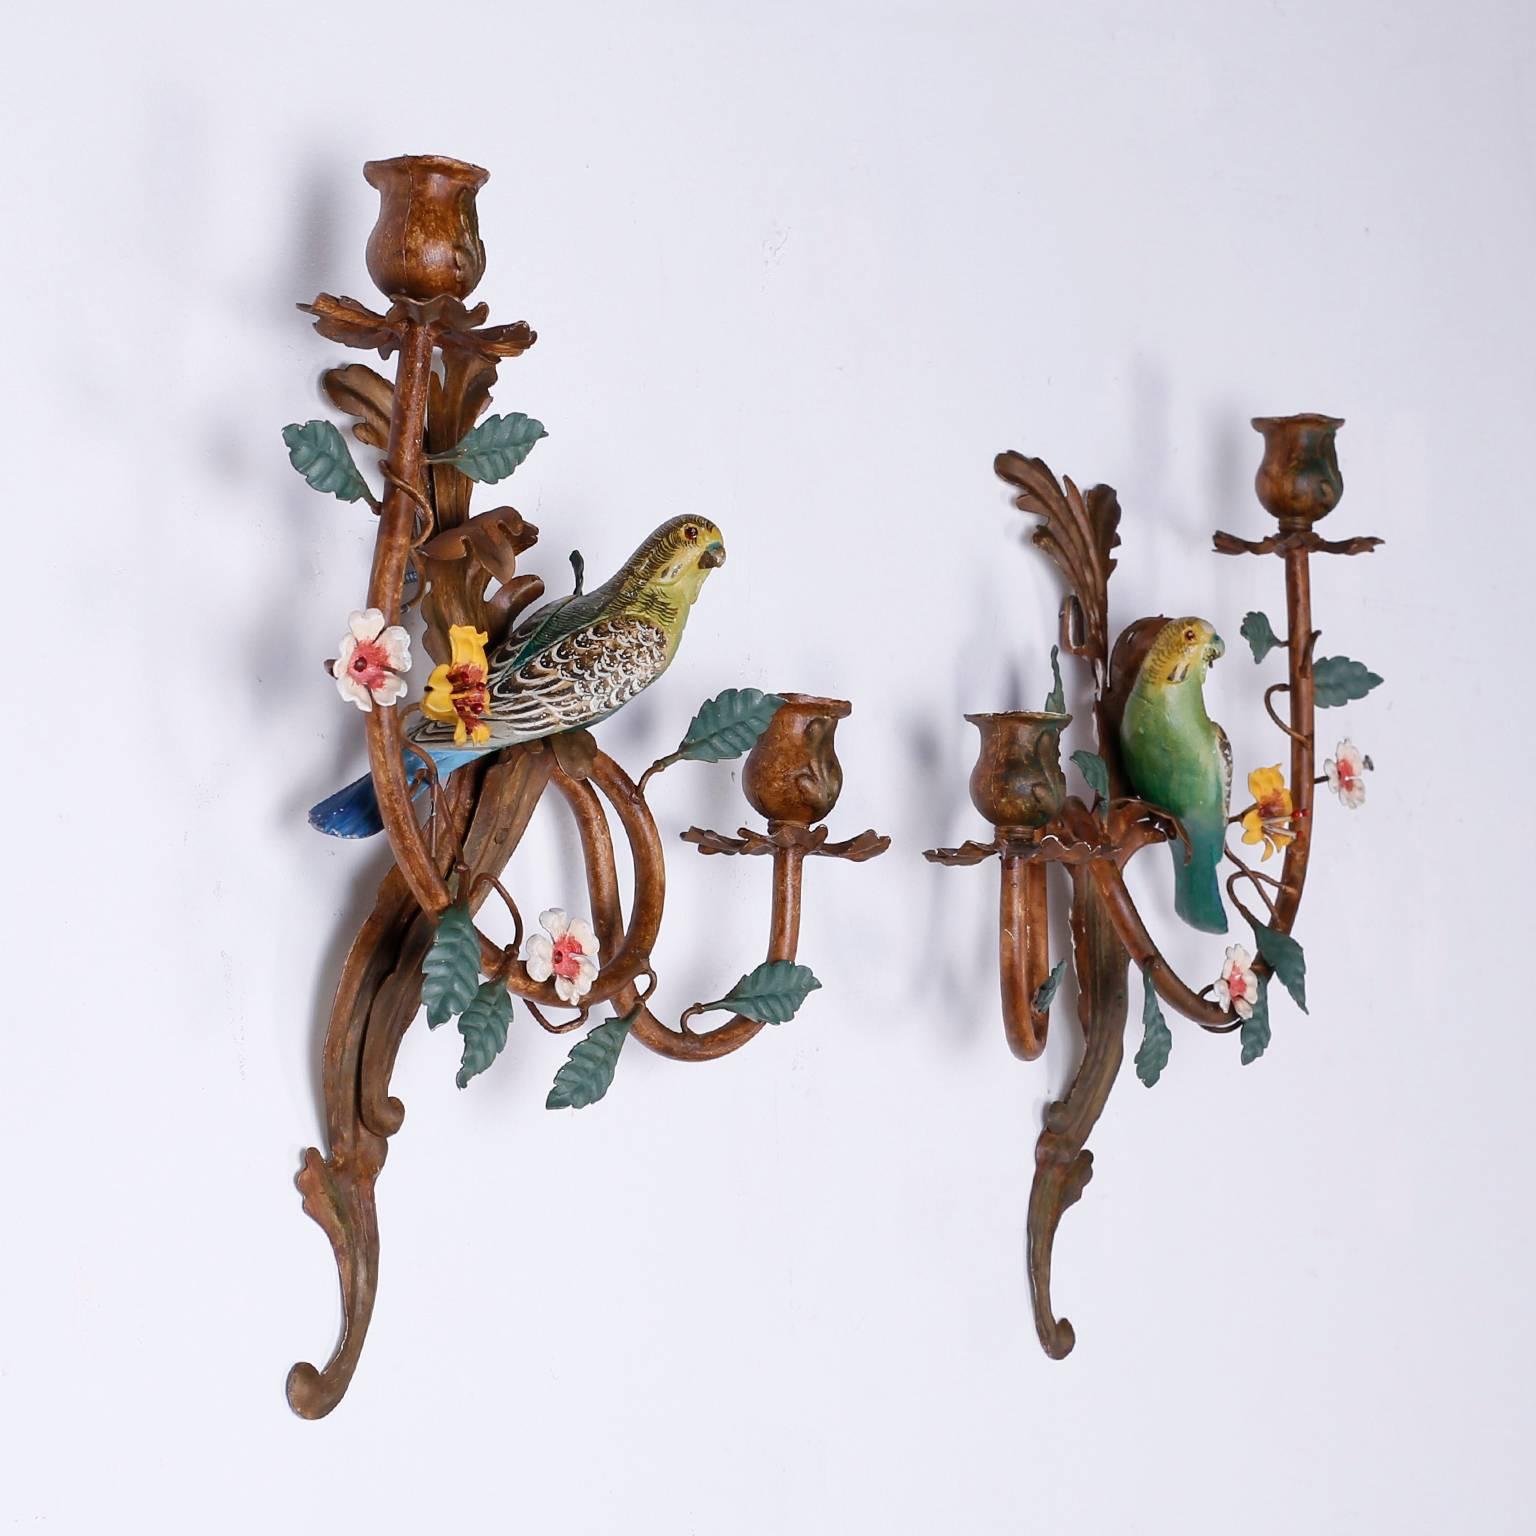 Rare pair of vintage Italian tole sconces with a leaf and flower motif
supporting two candle holders on each sconce. Featuring perched
polychrome parakeets with a curious expression naturally oxidized to perfection.